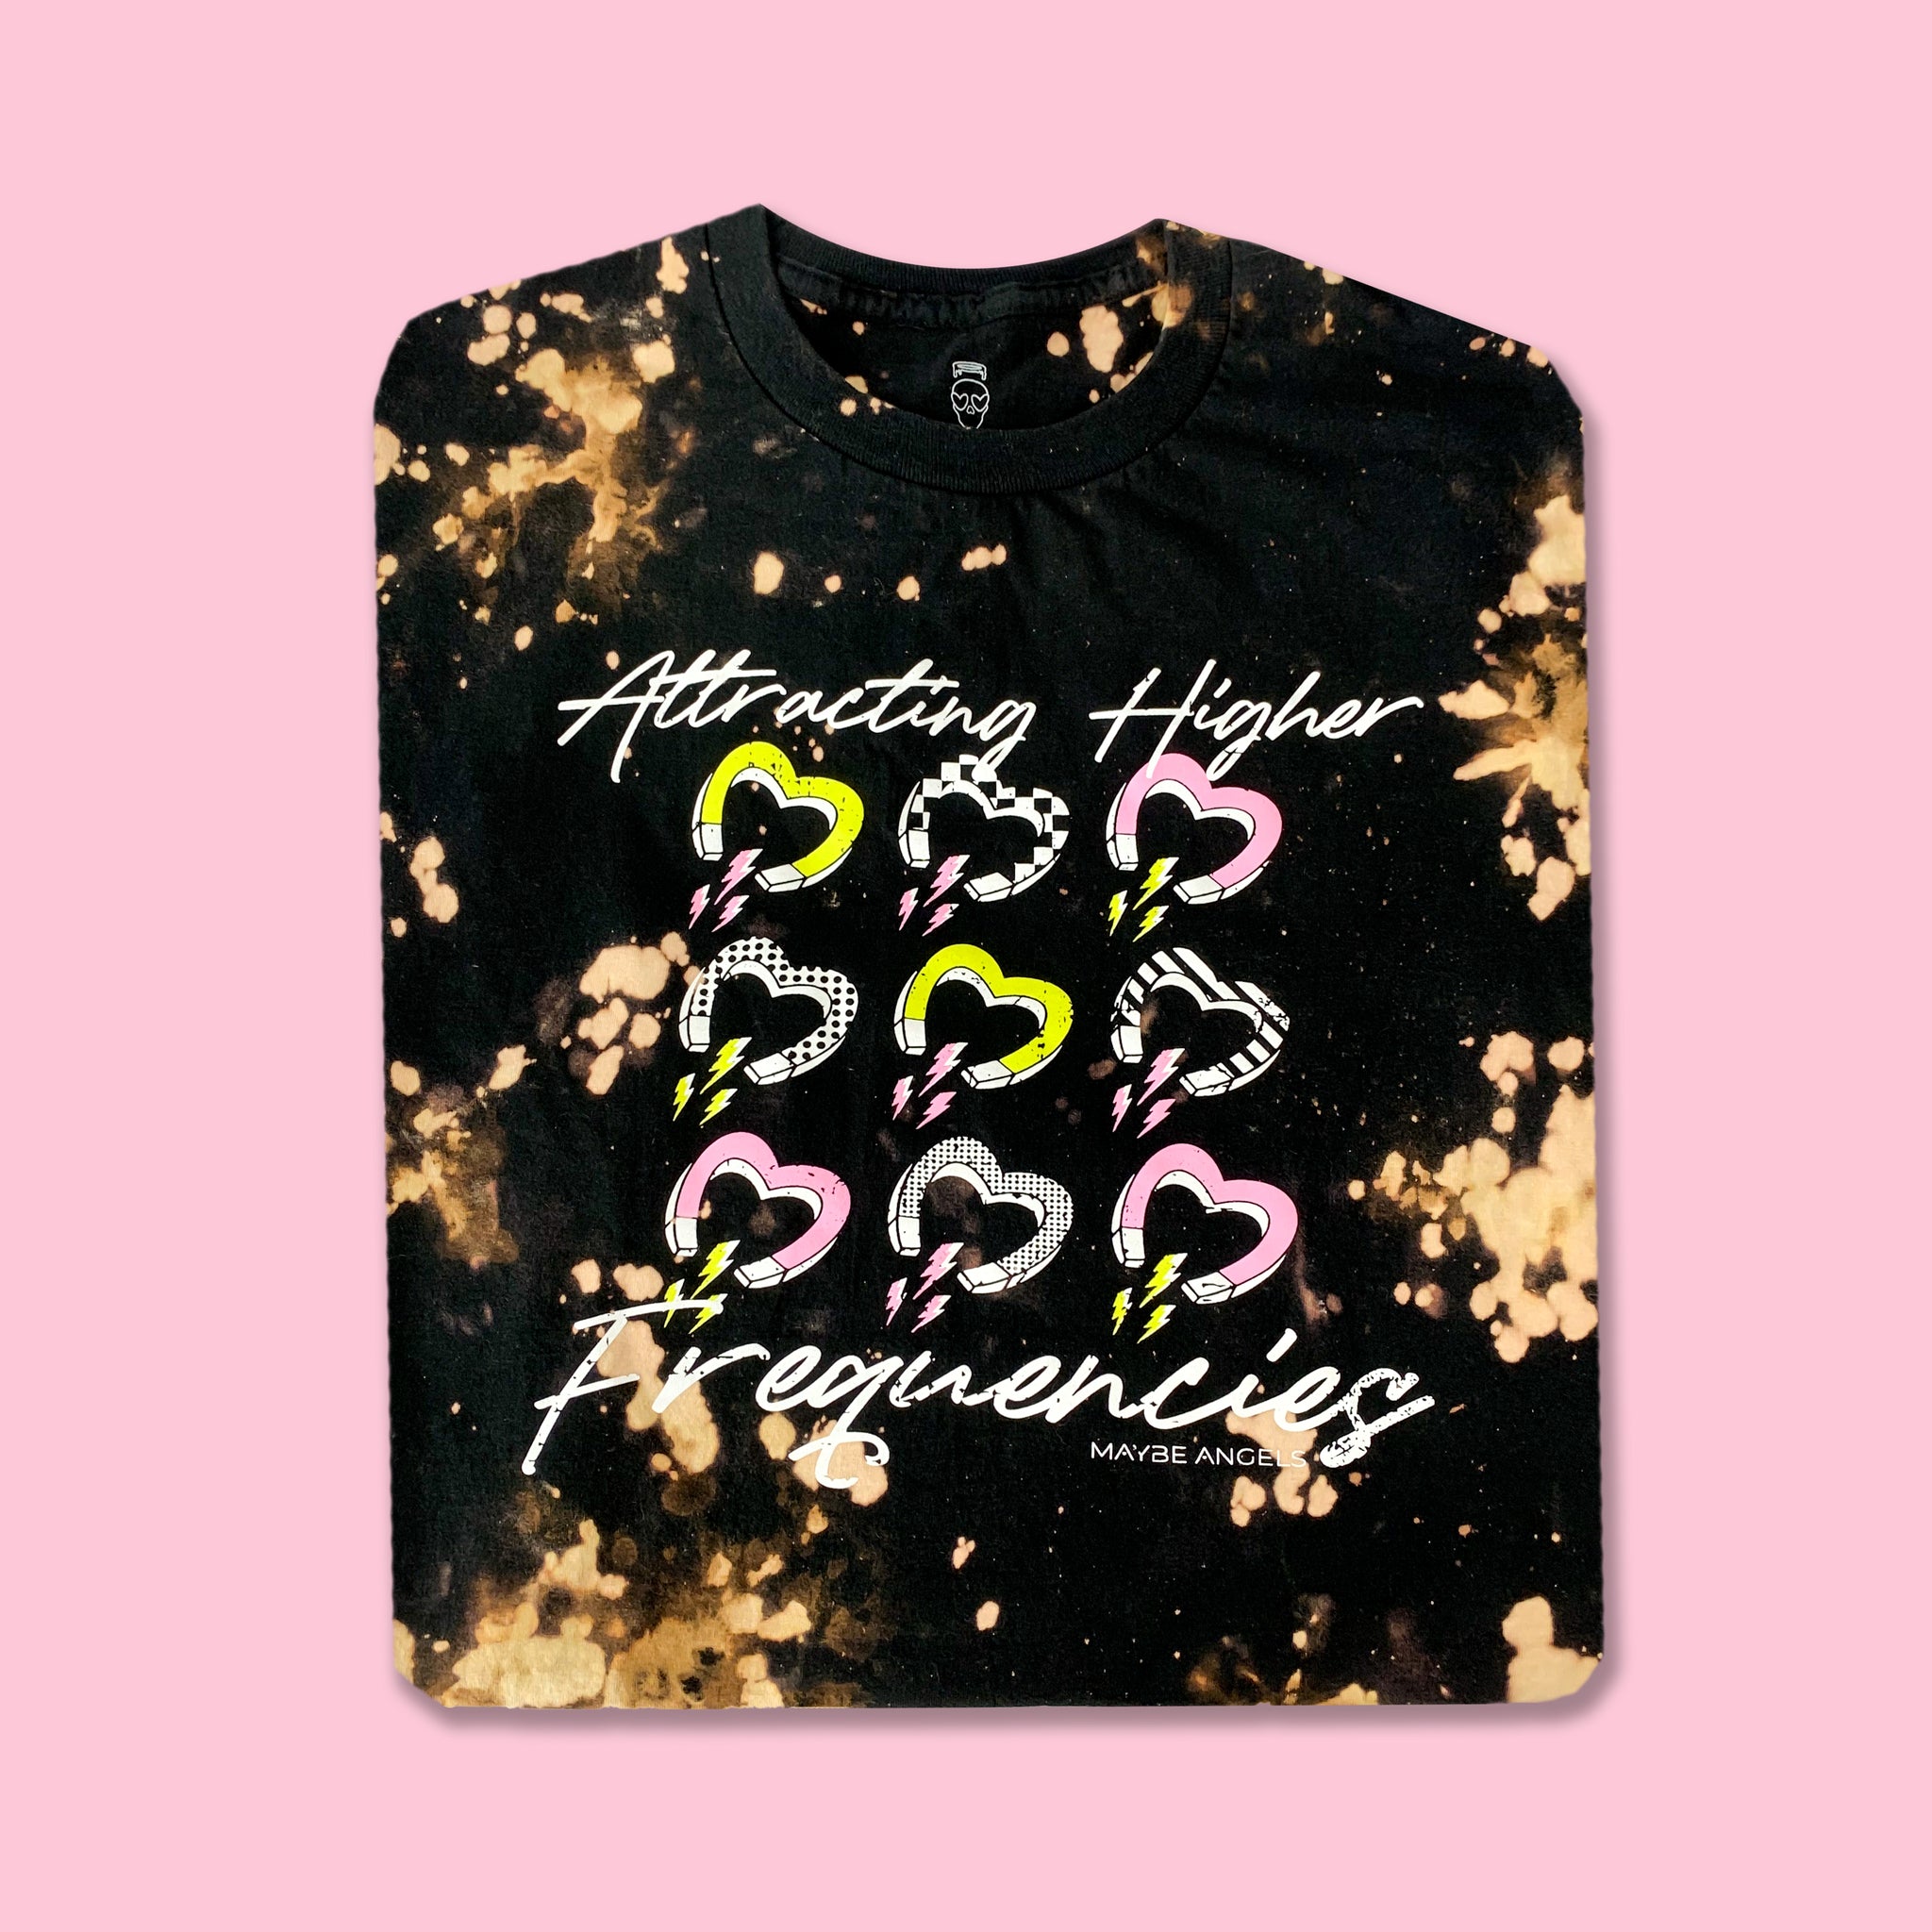 Magnetic Frequencies Graphic Tee – Maybe Angels